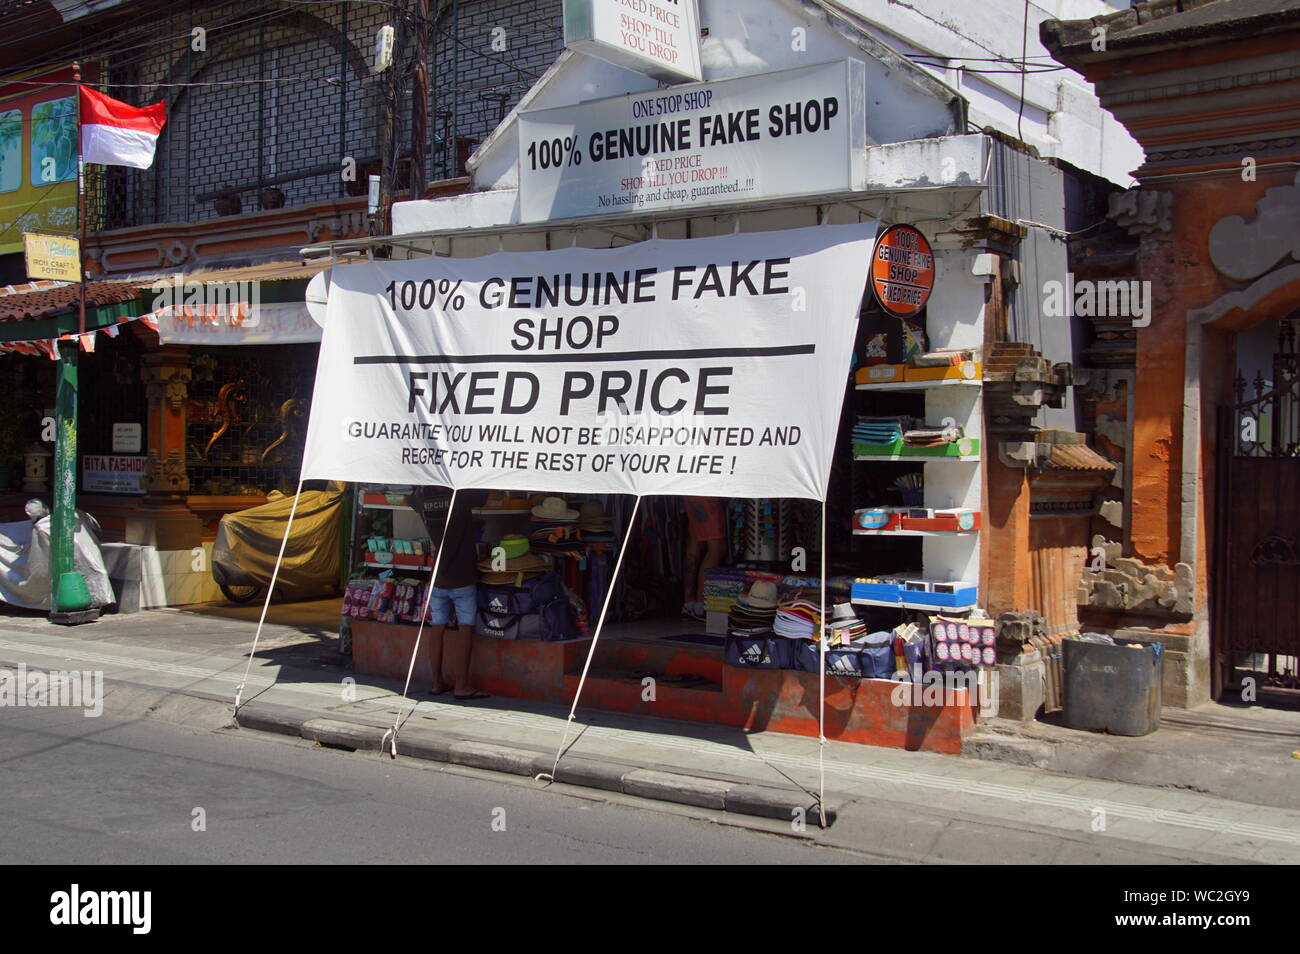 Legian, Bali, Indonesia - August 13, 2018: Indonesian souvenir shop advertising for real fake products. Stock Photo